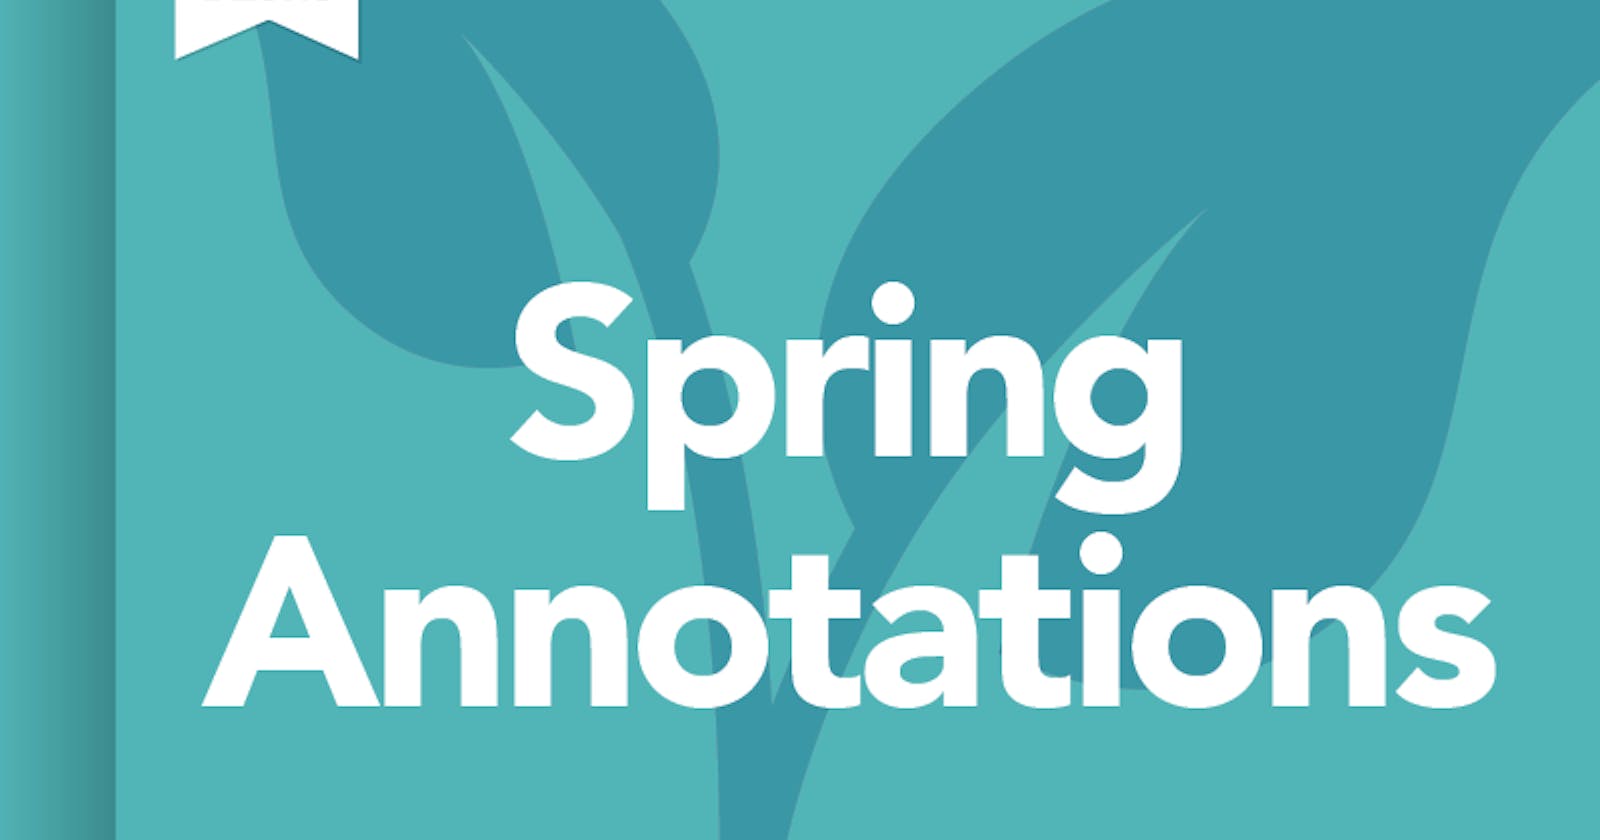 Guide for Spring annotations